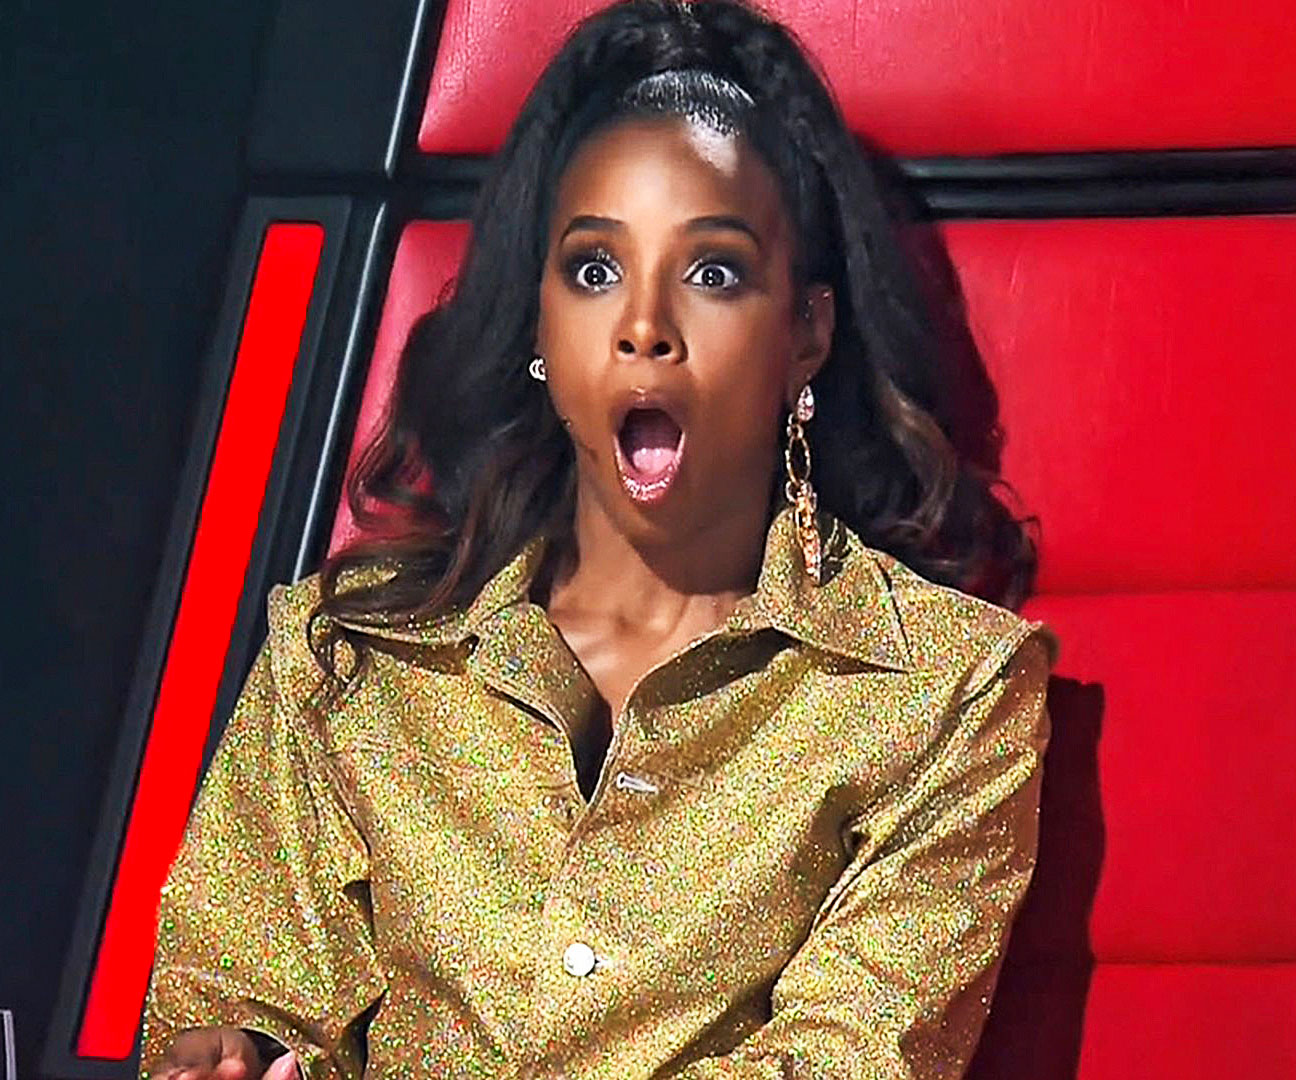 EXCLUSIVE: Inside the most explosive The Voice Australia clash ever